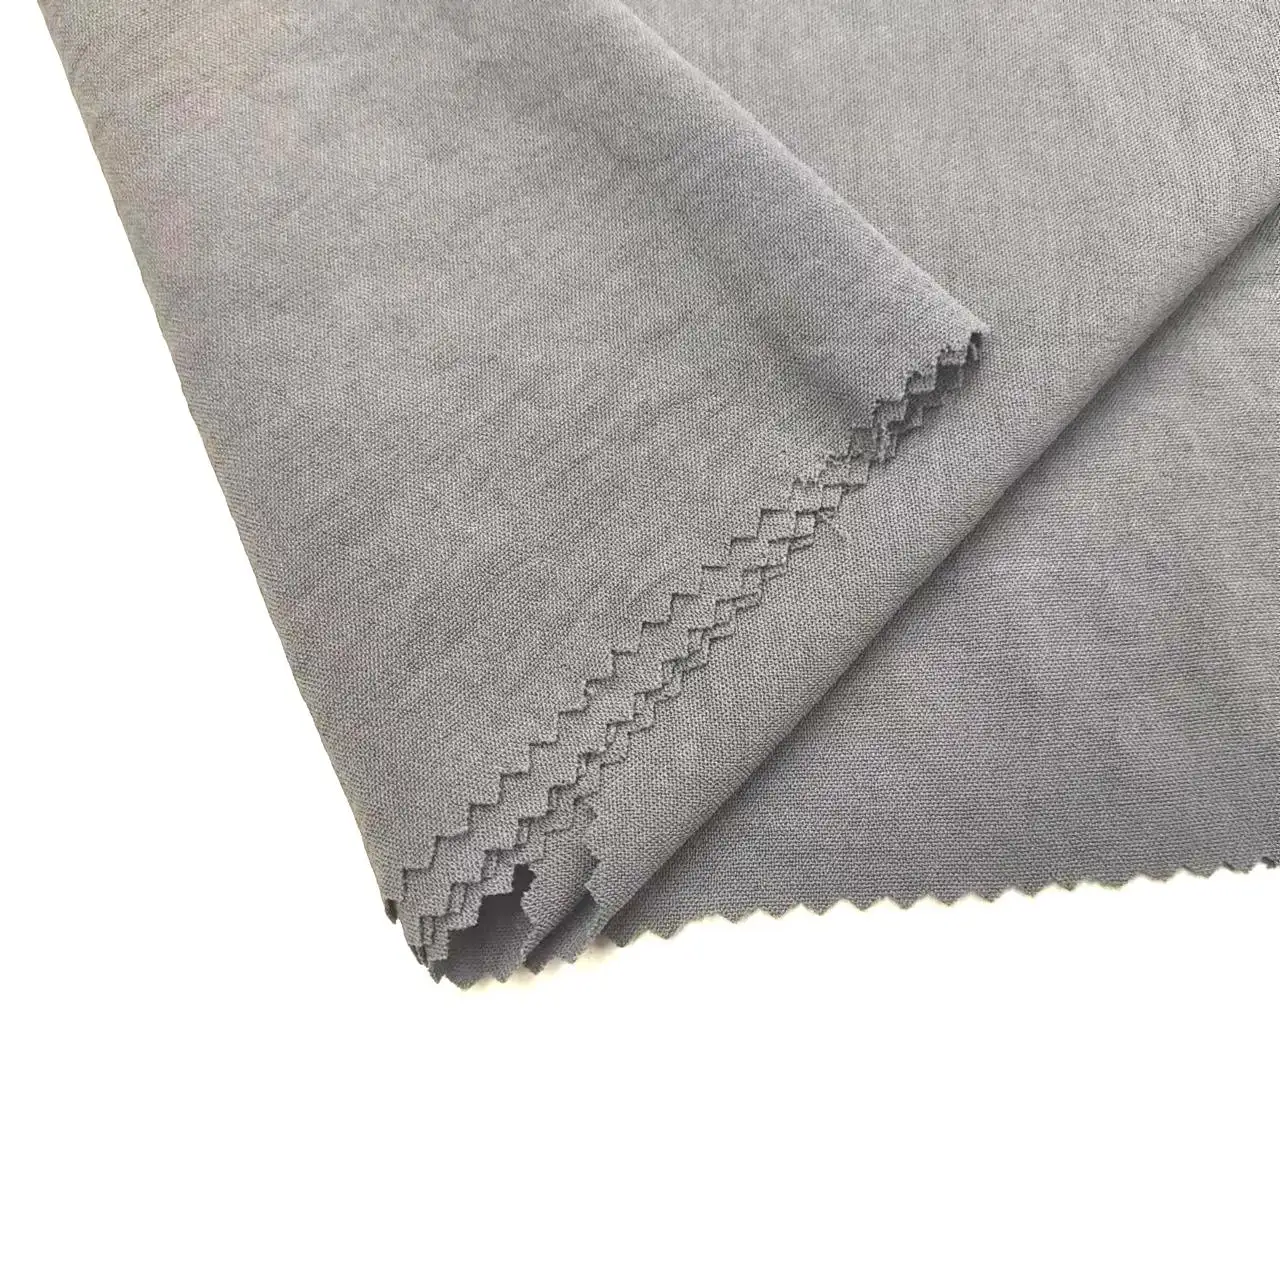 Wrinkle Crinkle 100% Polyester Air Flow Woven Crepe Cey Pd Fabric For Muslim Clothing Abaya soft crepe fabric